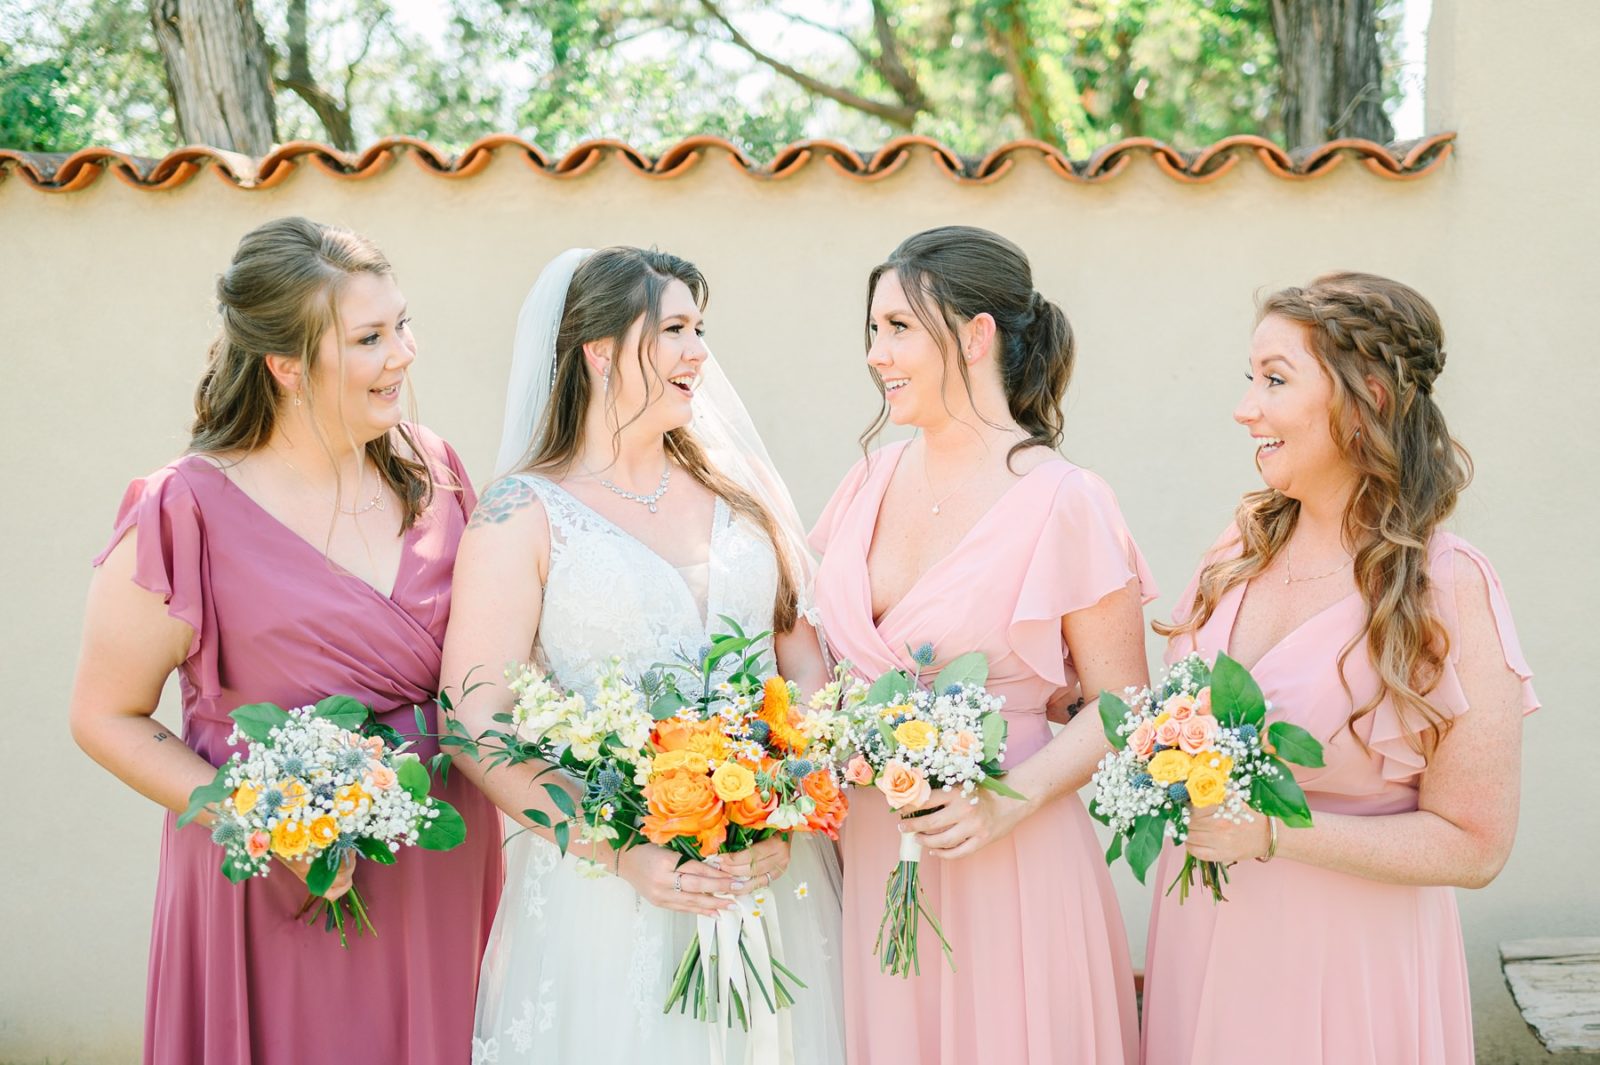 bride and bridesmaids laughing, tilted tulip florals, austin wedding, tuscan hall, chapel dulcinea wedding venues, tuscan hall and veranda room, tuscan hall wedding venue, austin wedding, austin wedding photography, hill country wedding, unique austin wedding venue, veranda room, chapel dulcinea, wizards guest room, wizard academy wedding venue, free austin wedding venue